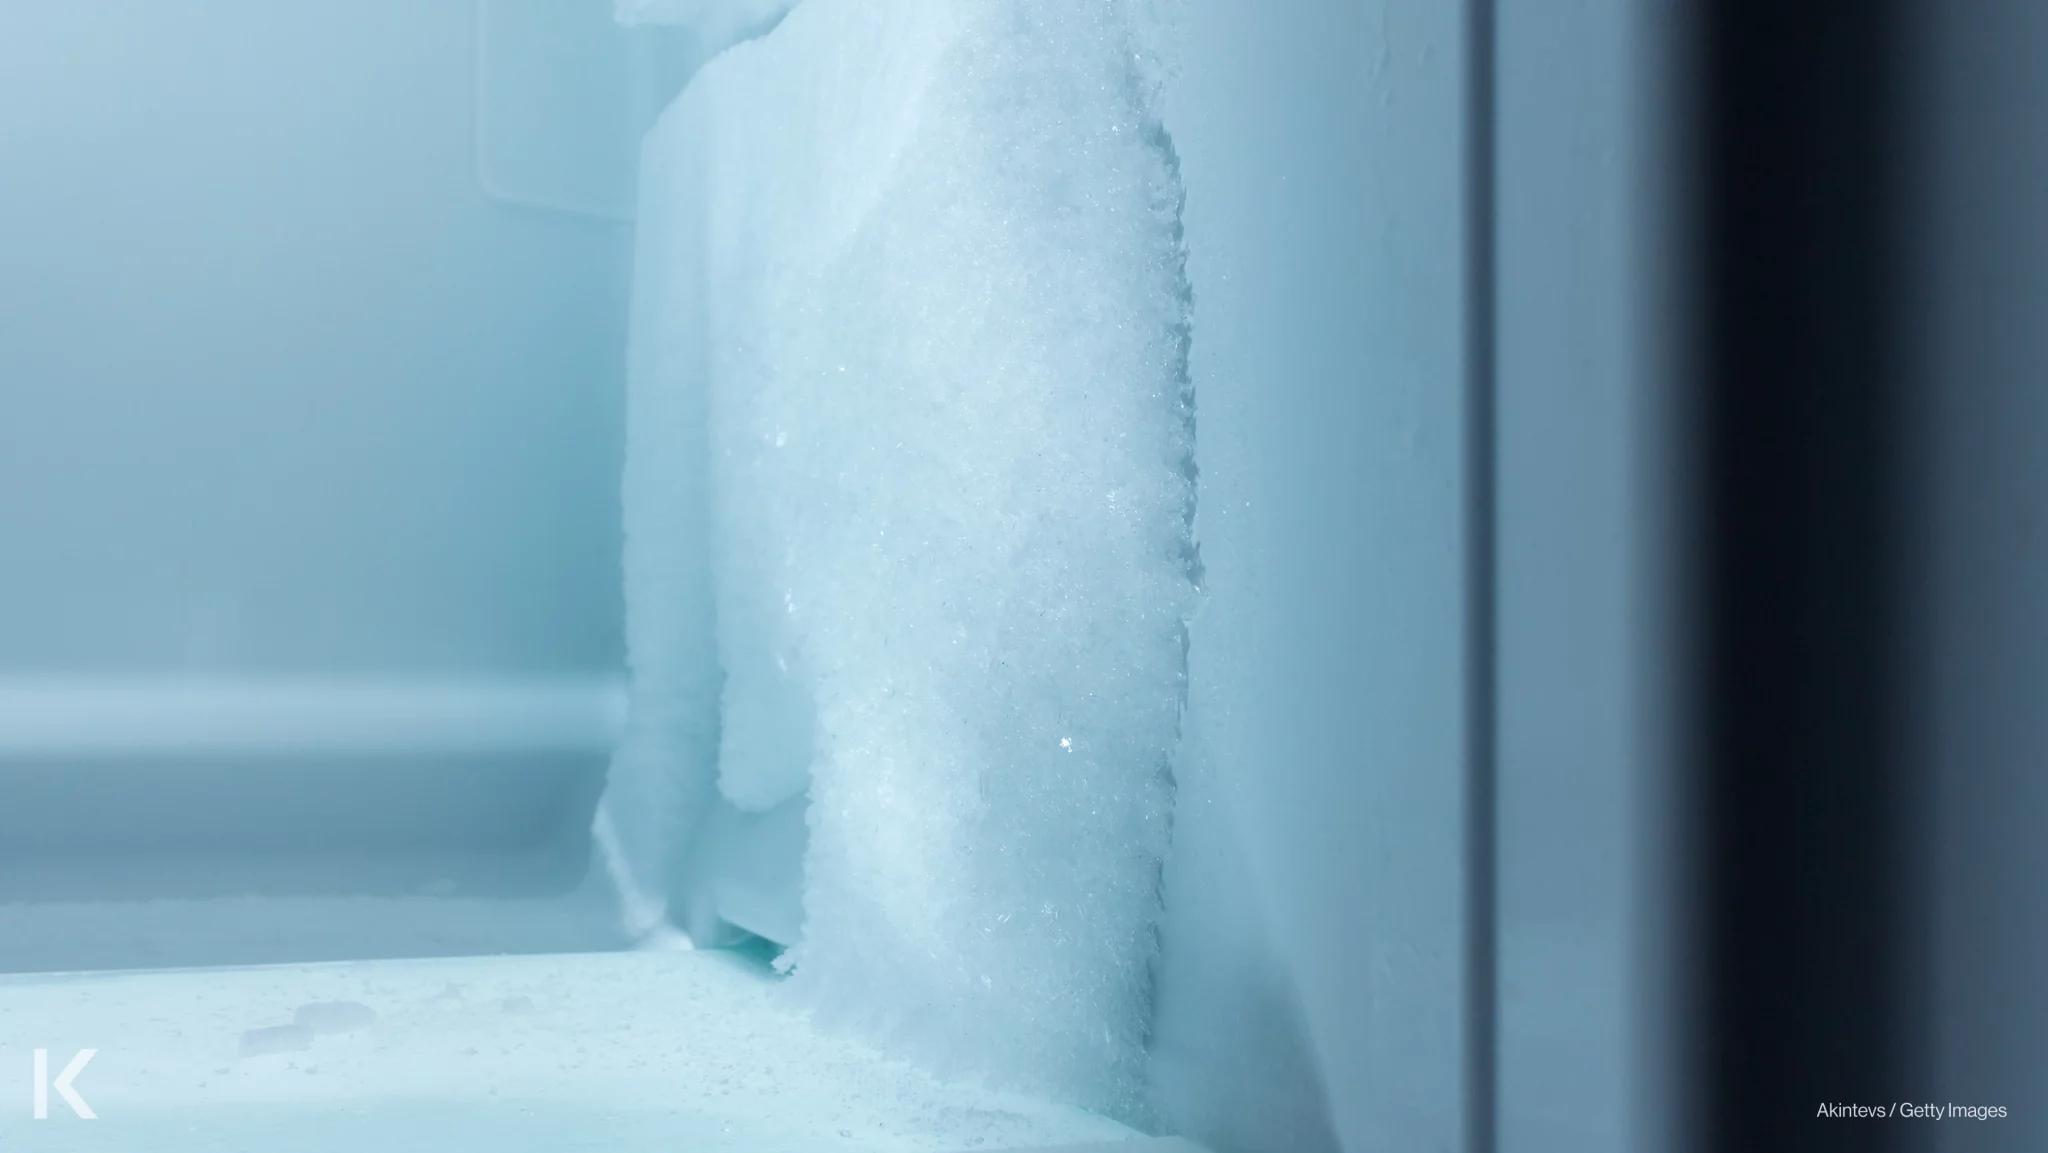 Icy freezer, one of the most common problems with refrigeration and freezing systems.